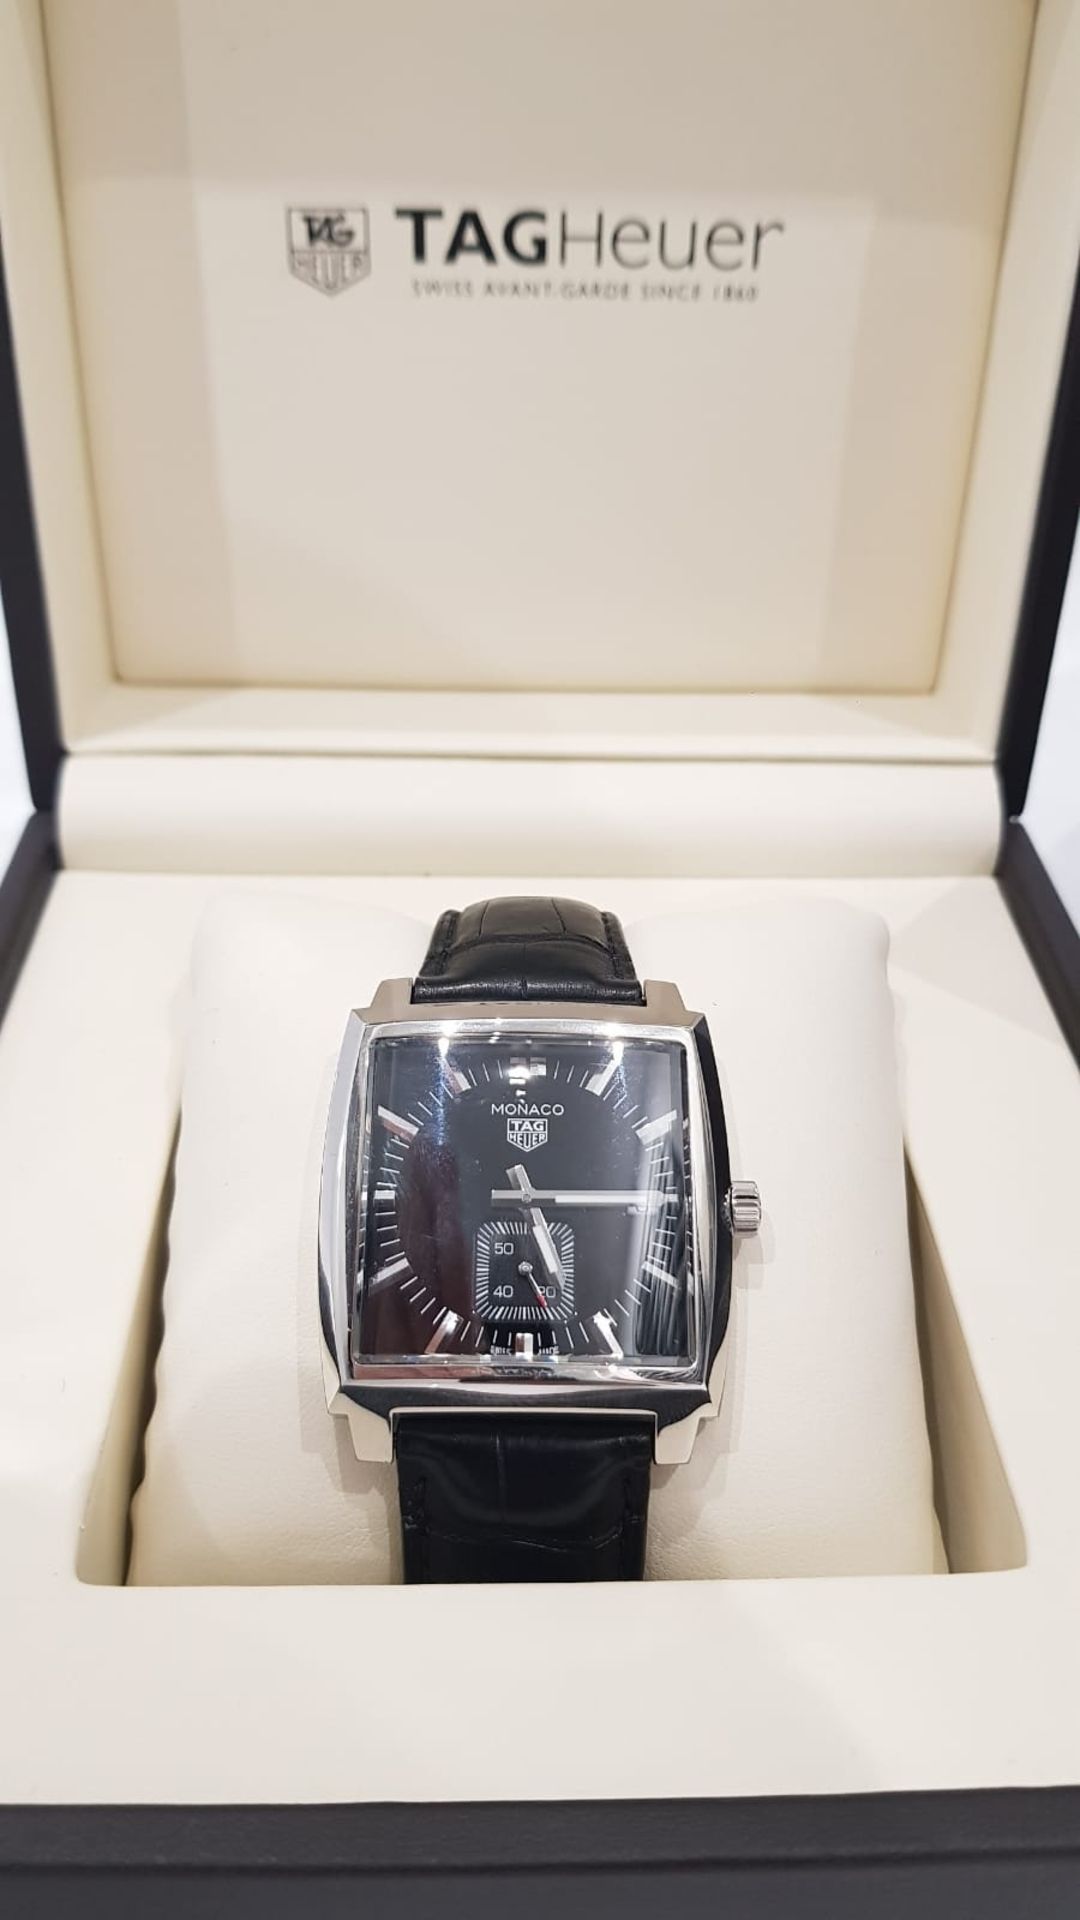 TAG HEUER MONACO MENS 37MM, WITH BOX & GUARANTEE CARD - Image 2 of 7